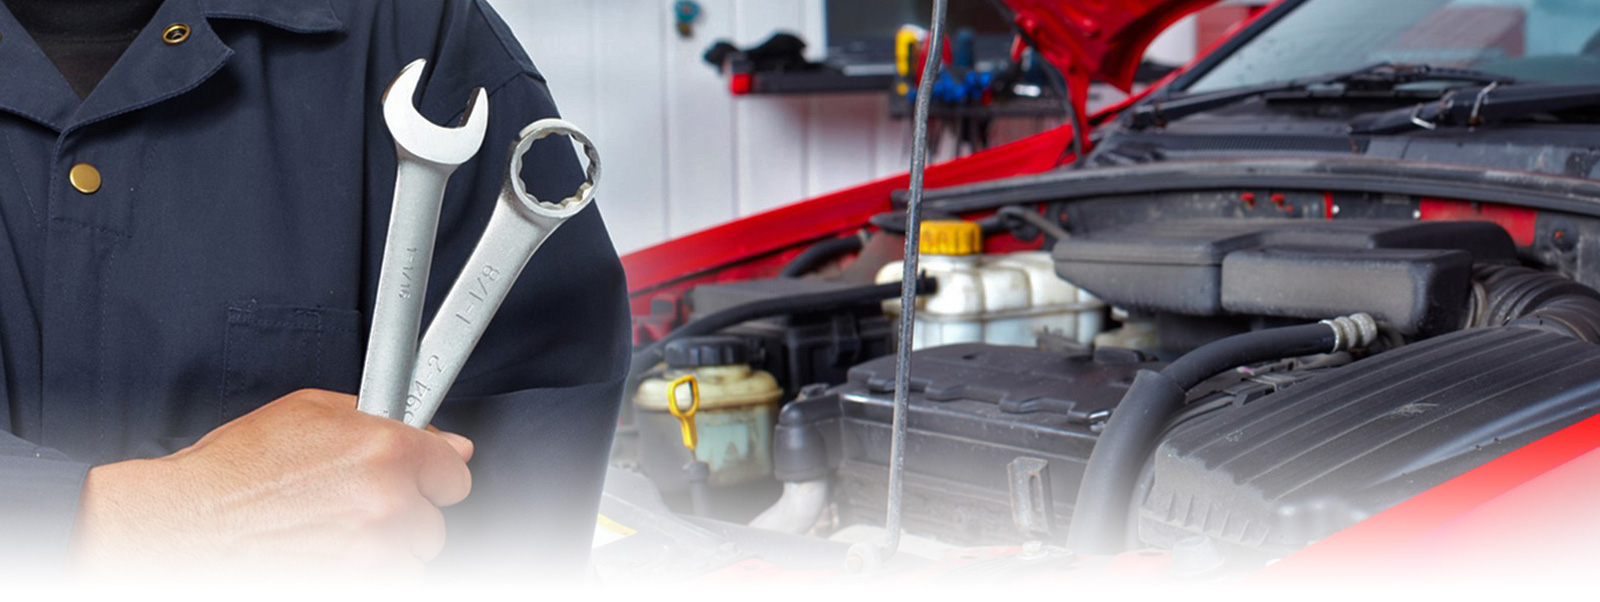 Photo of Mechanic Holding A Wrench with a car with an openhood behind.